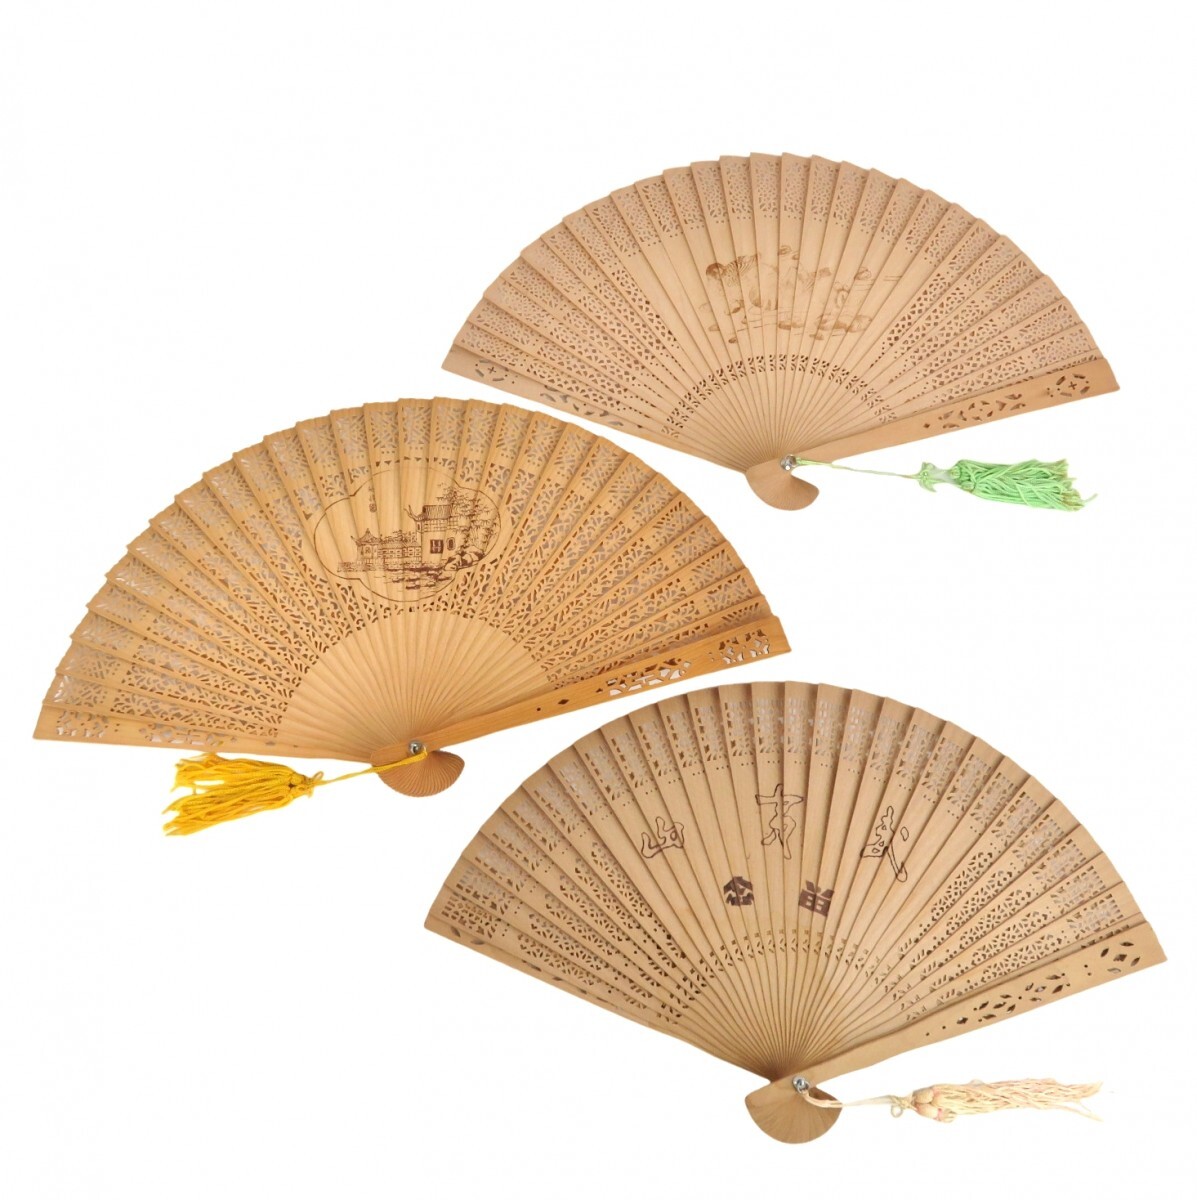  unused equipped summarize 13 point fan . tree .... carving tree industrial arts China handicraft kimono small articles out box attaching equipped 0504-059